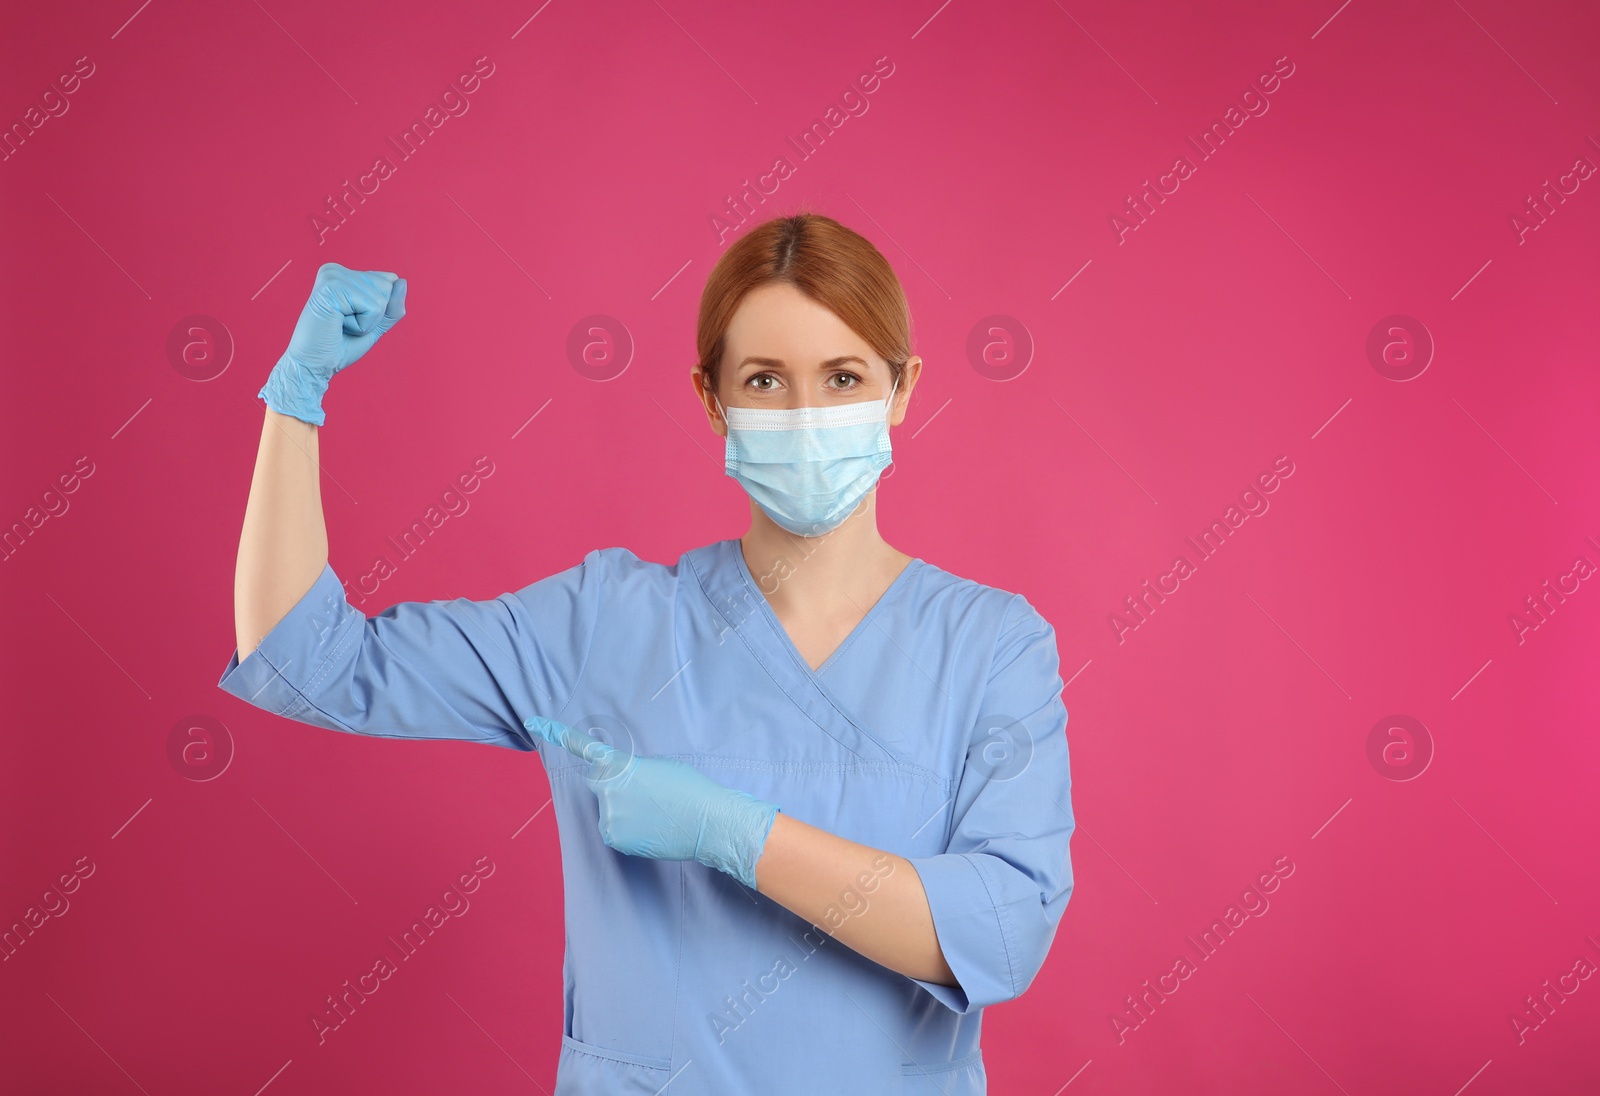 Photo of Doctor with protective mask showing muscles on pink background, space for text. Strong immunity concept